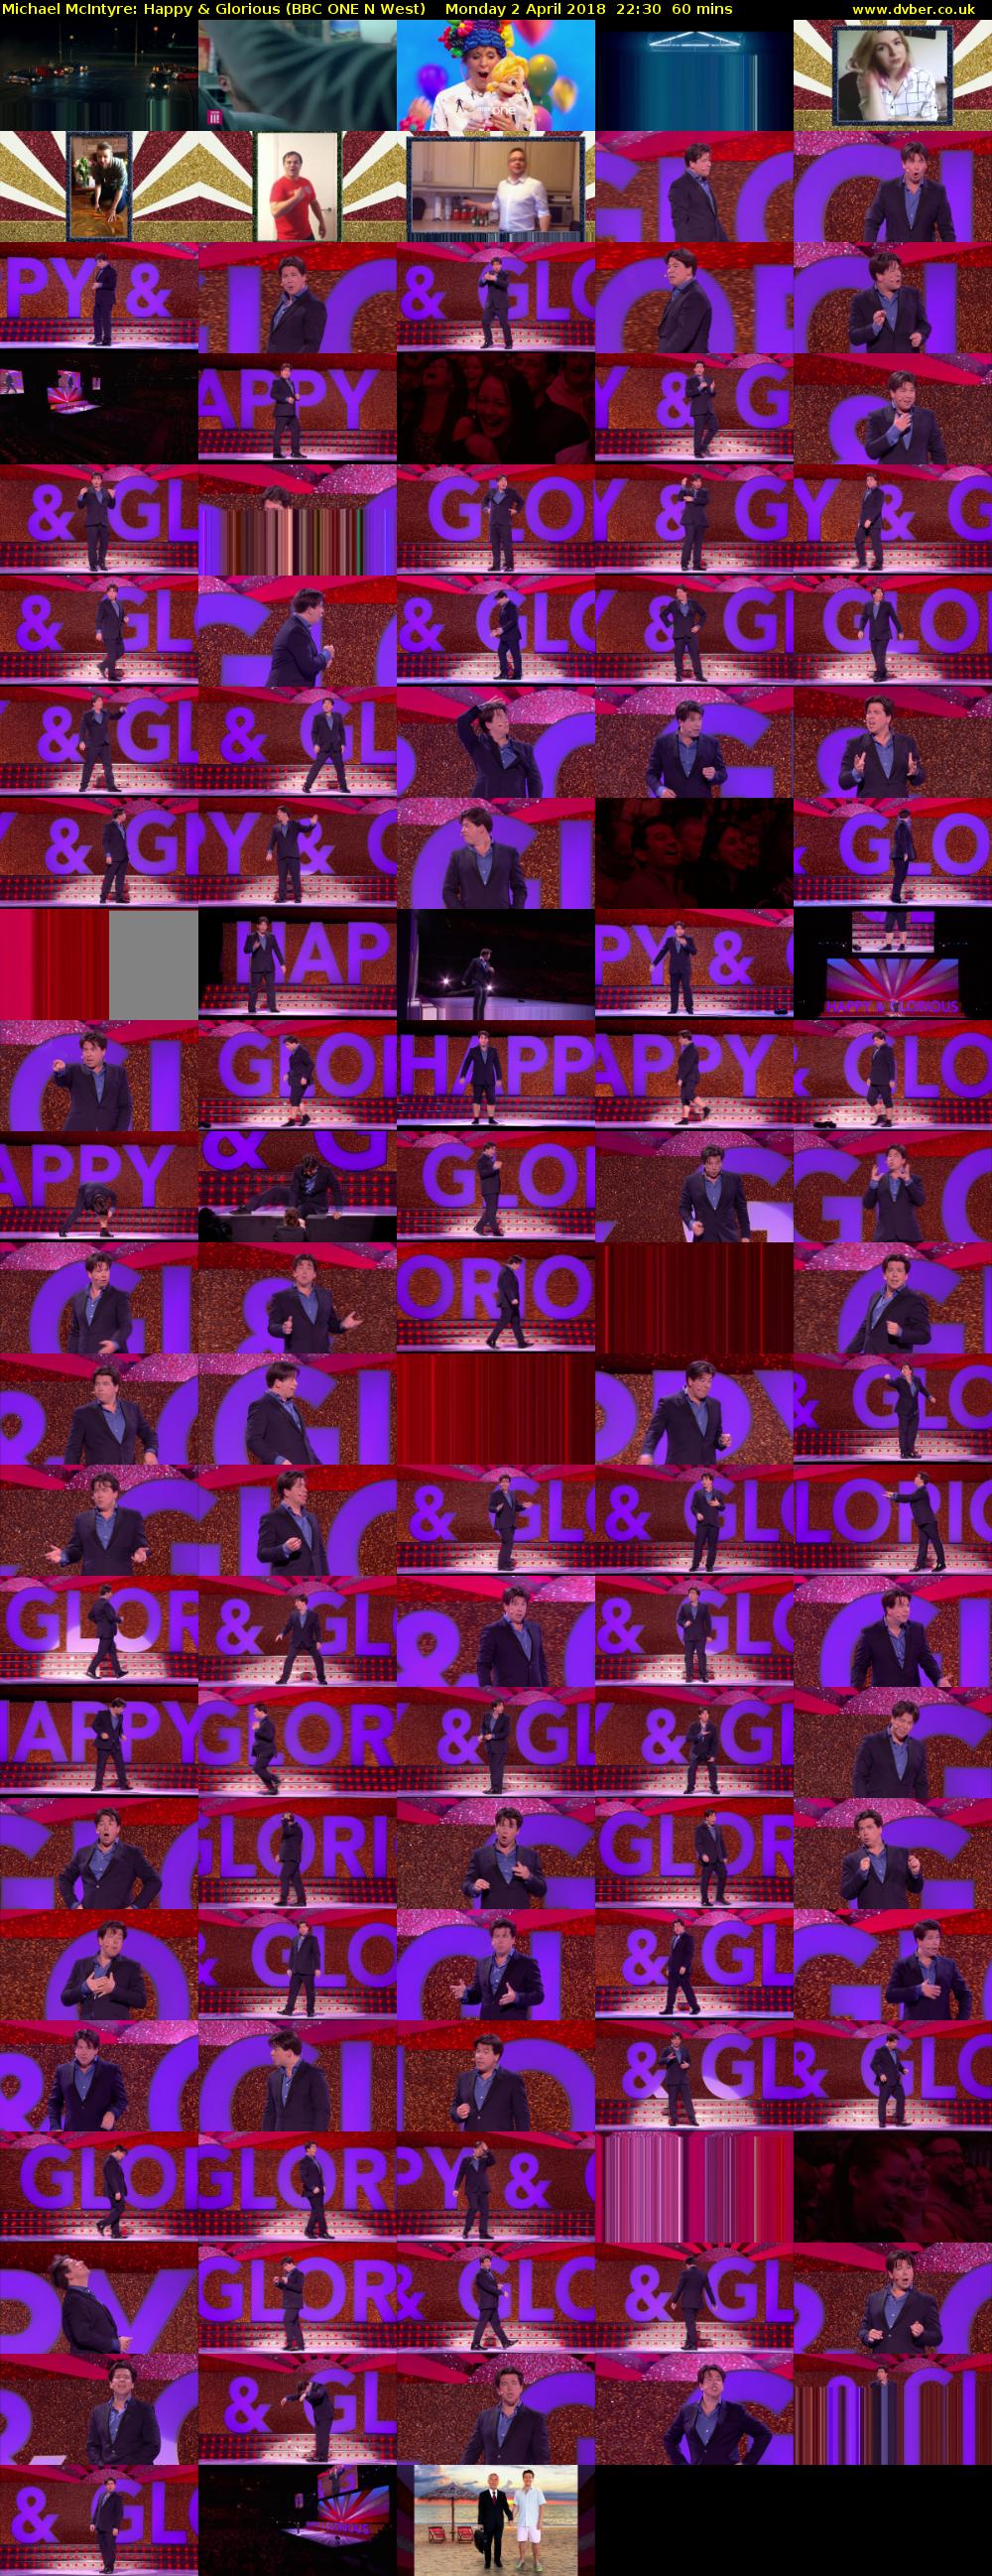 Michael McIntyre: Happy & Glorious (BBC ONE N West) Monday 2 April 2018 22:30 - 23:30